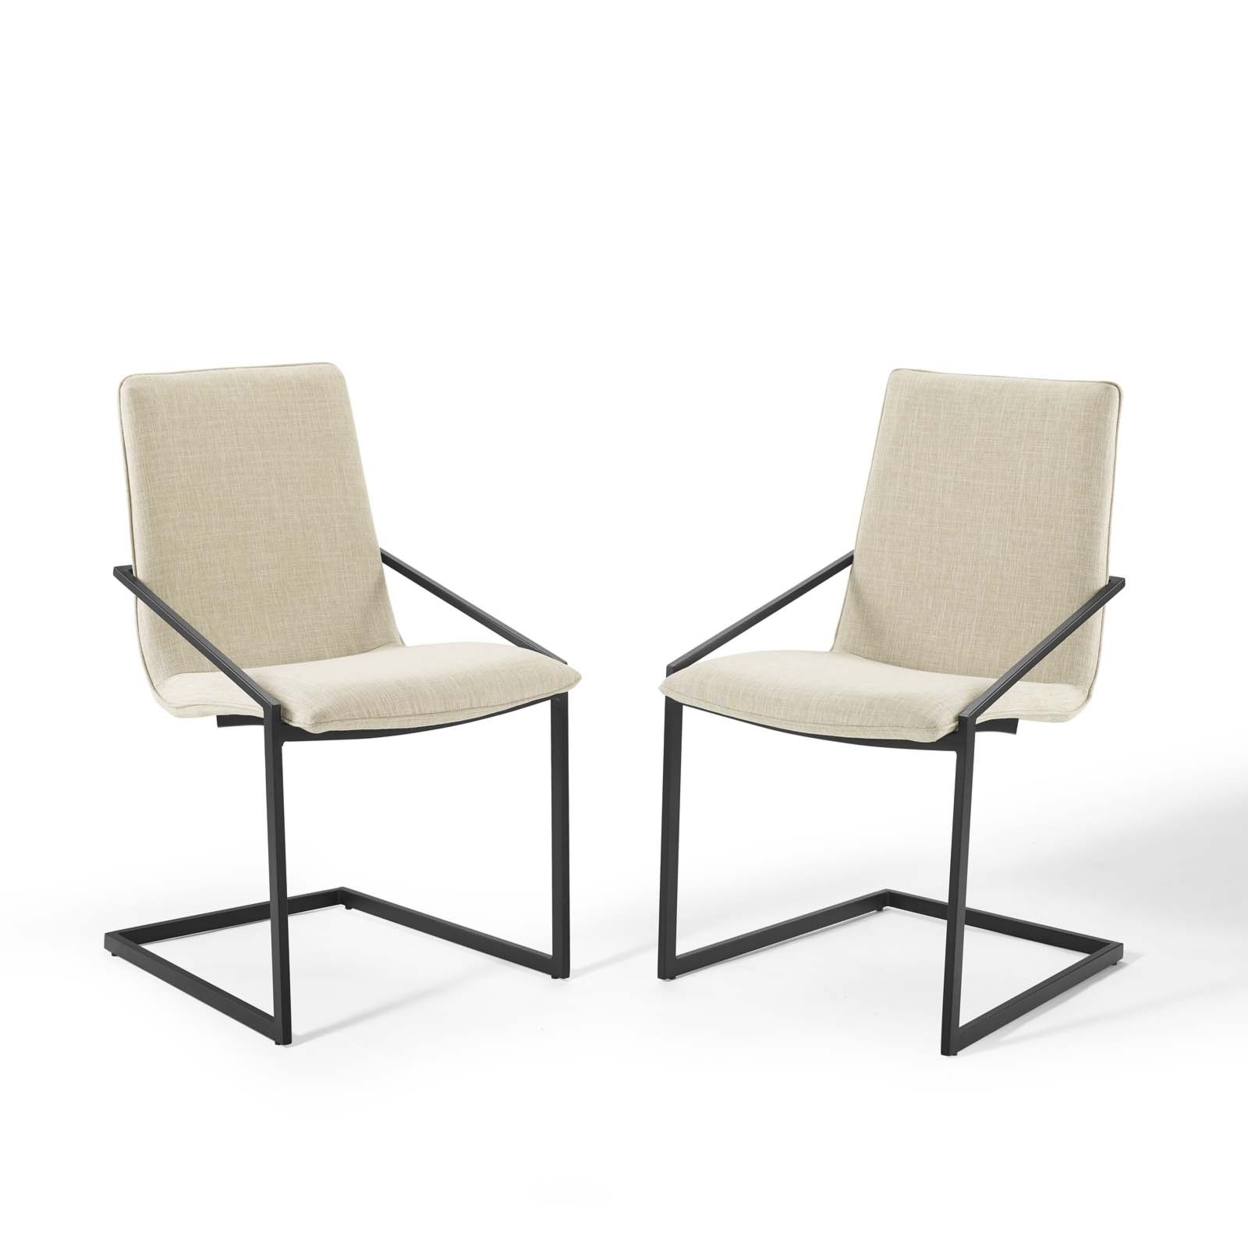 Pitch Dining Armchair Upholstered Fabric Set Of 2, Black Beige